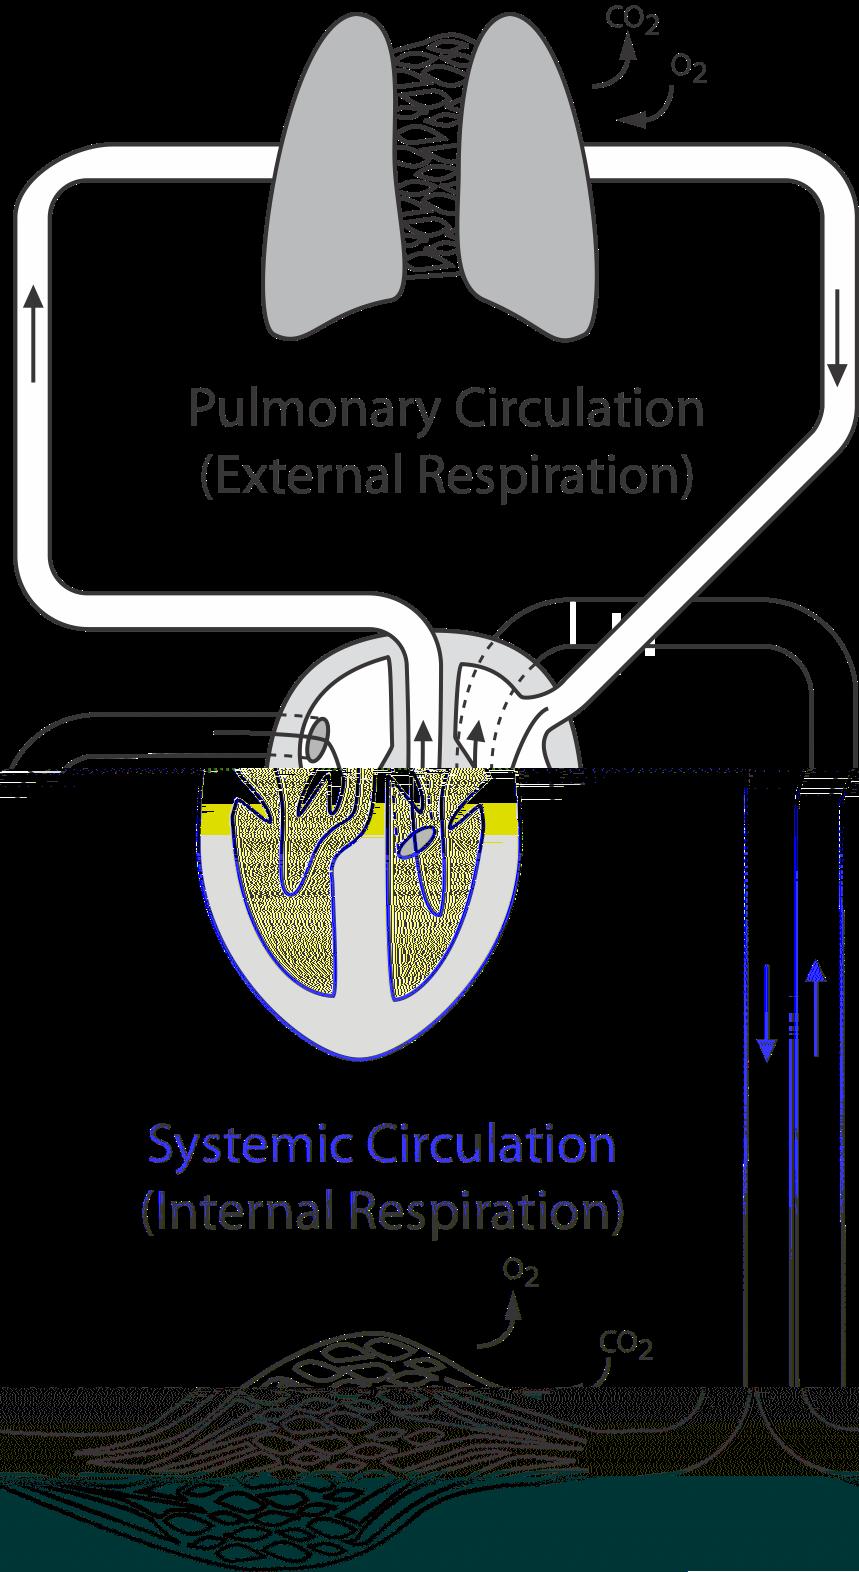 The Respiratory System If you have not done so already, please print and bring to class the